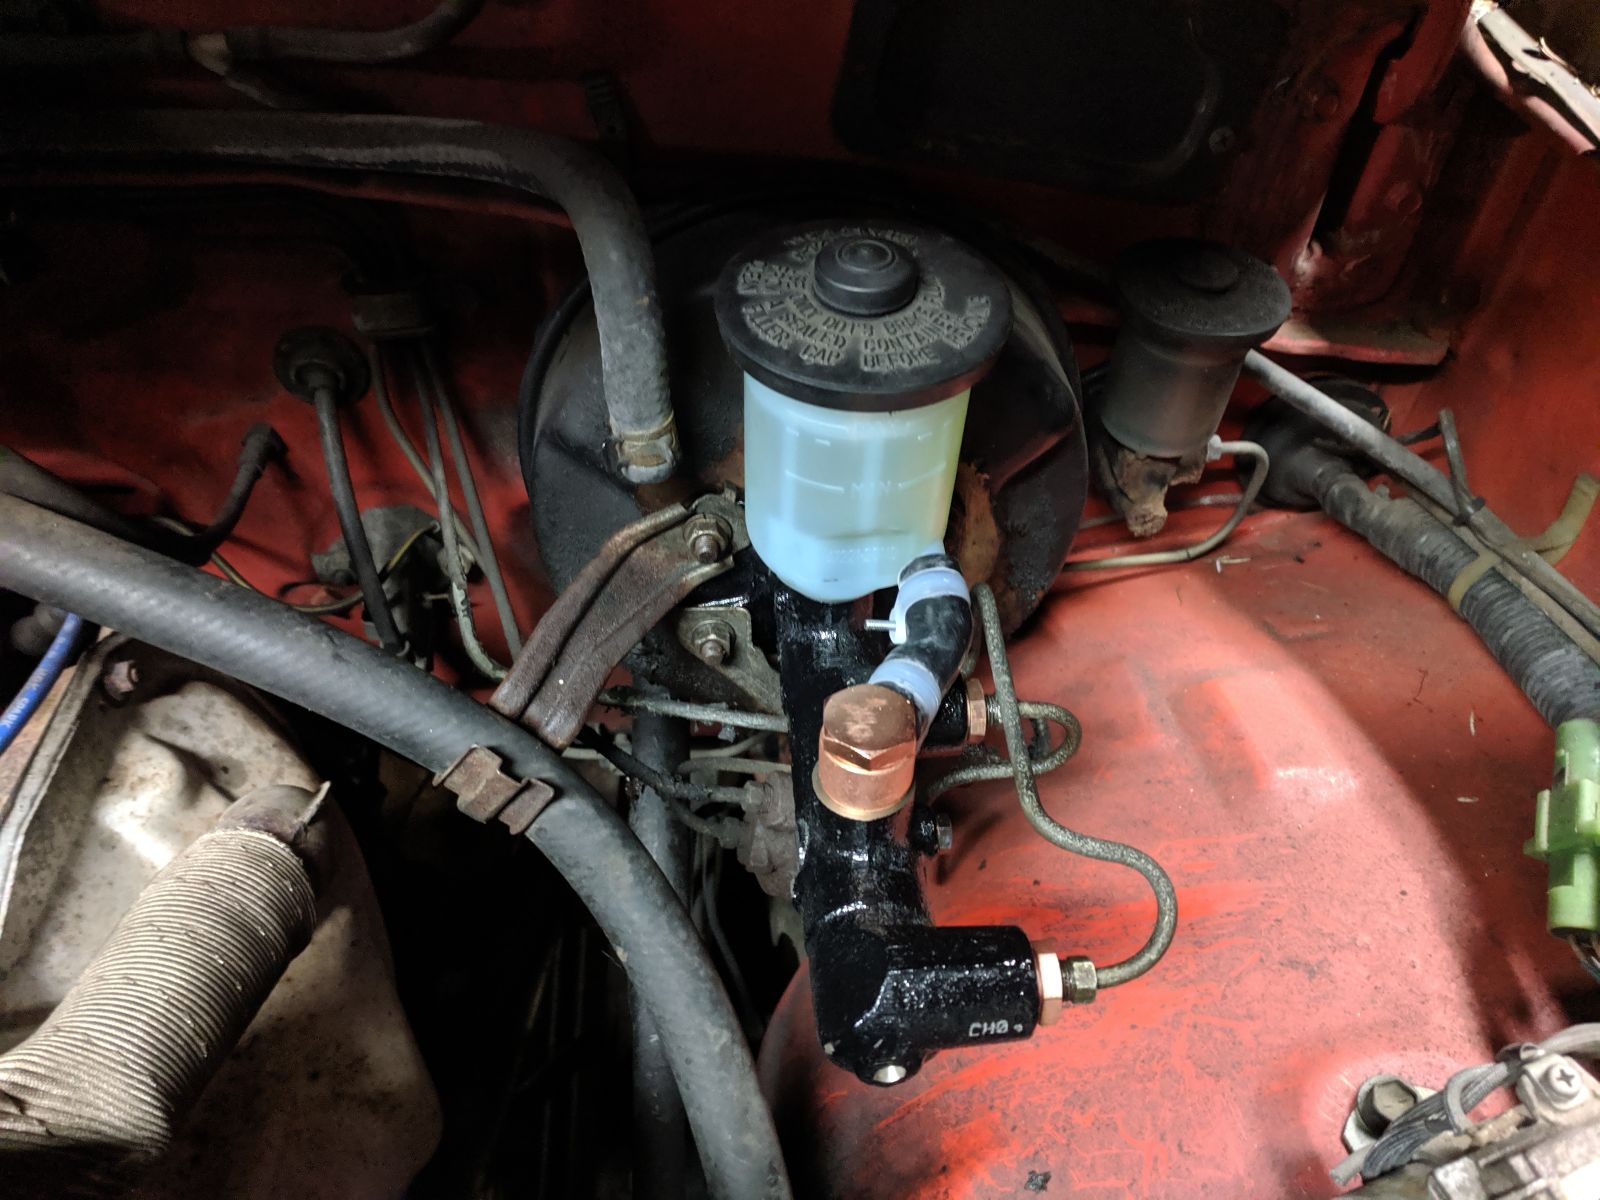 New cylinder on, reused the OEM cap.